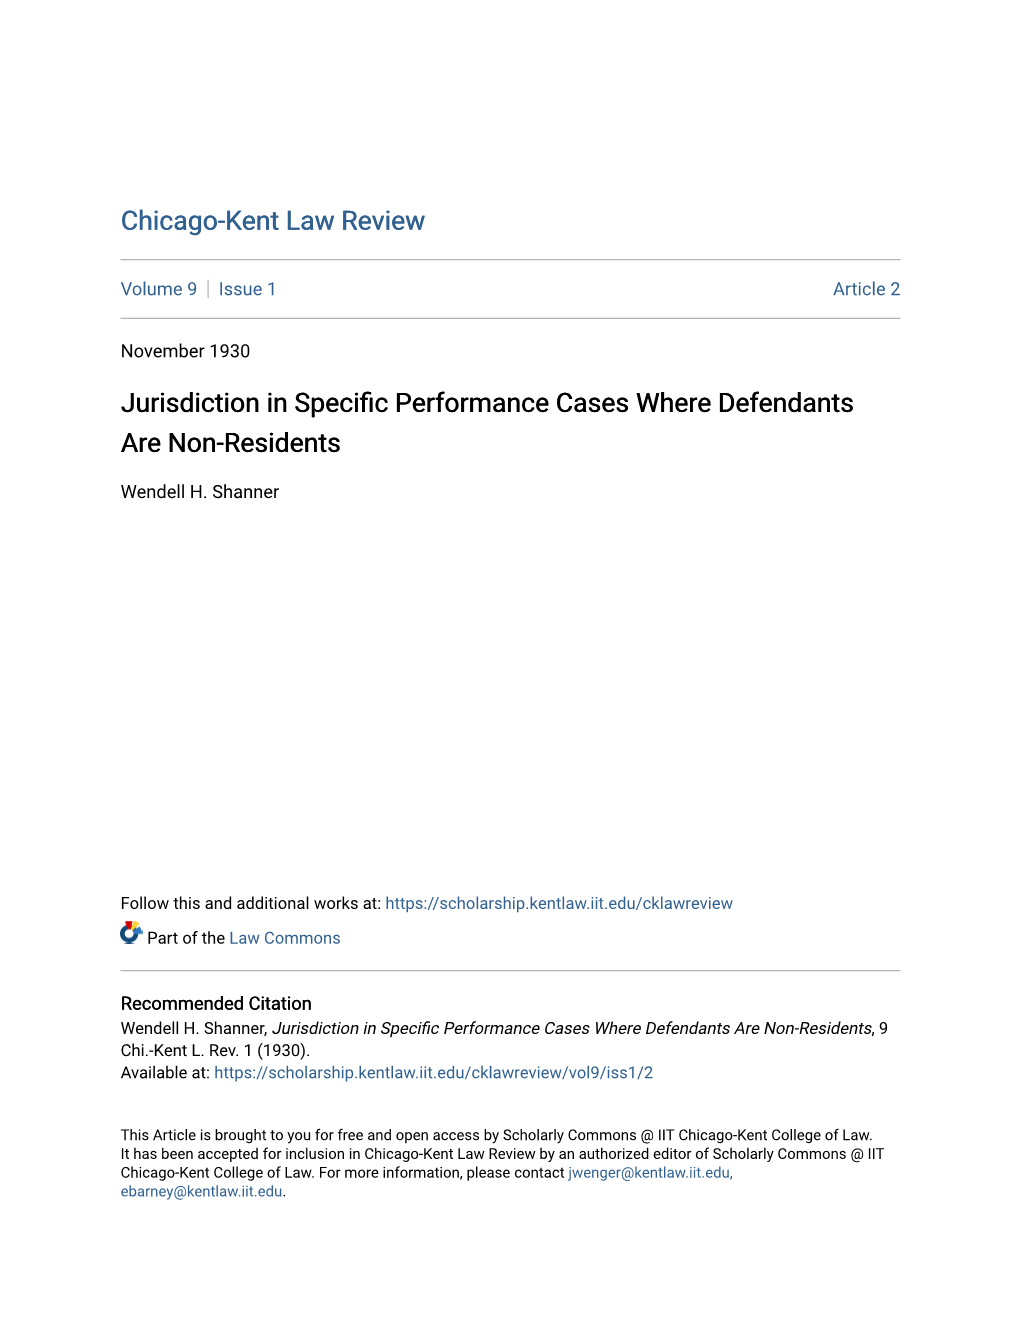 Jurisdiction in Specific Performance Cases Where Defendants Are Non-Residents